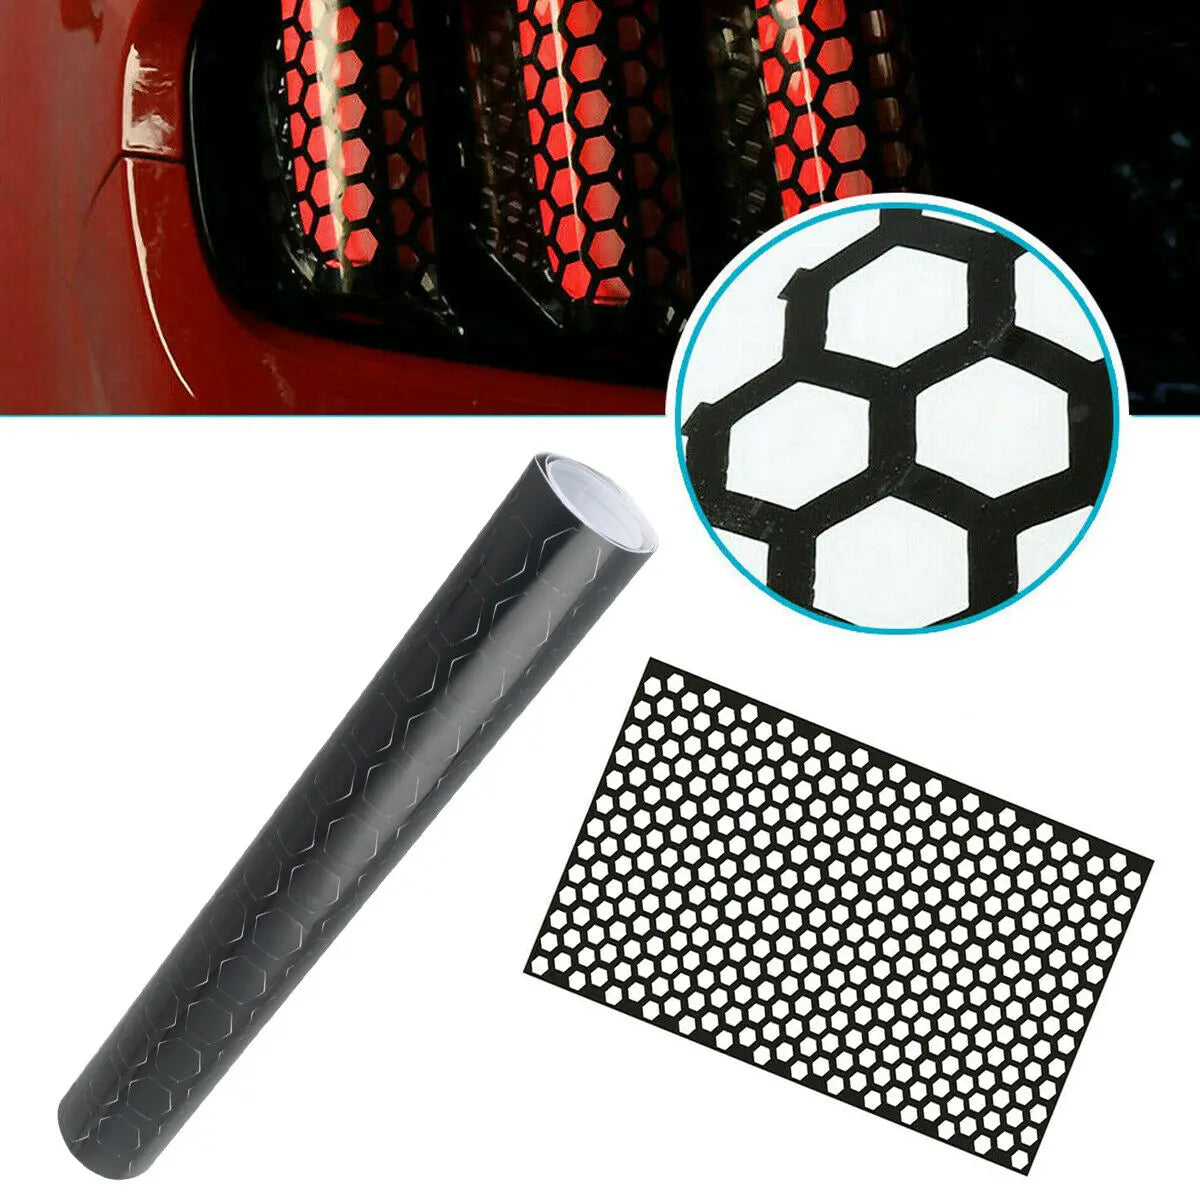 Honeycomb Sticker Taillight Lamp Cover